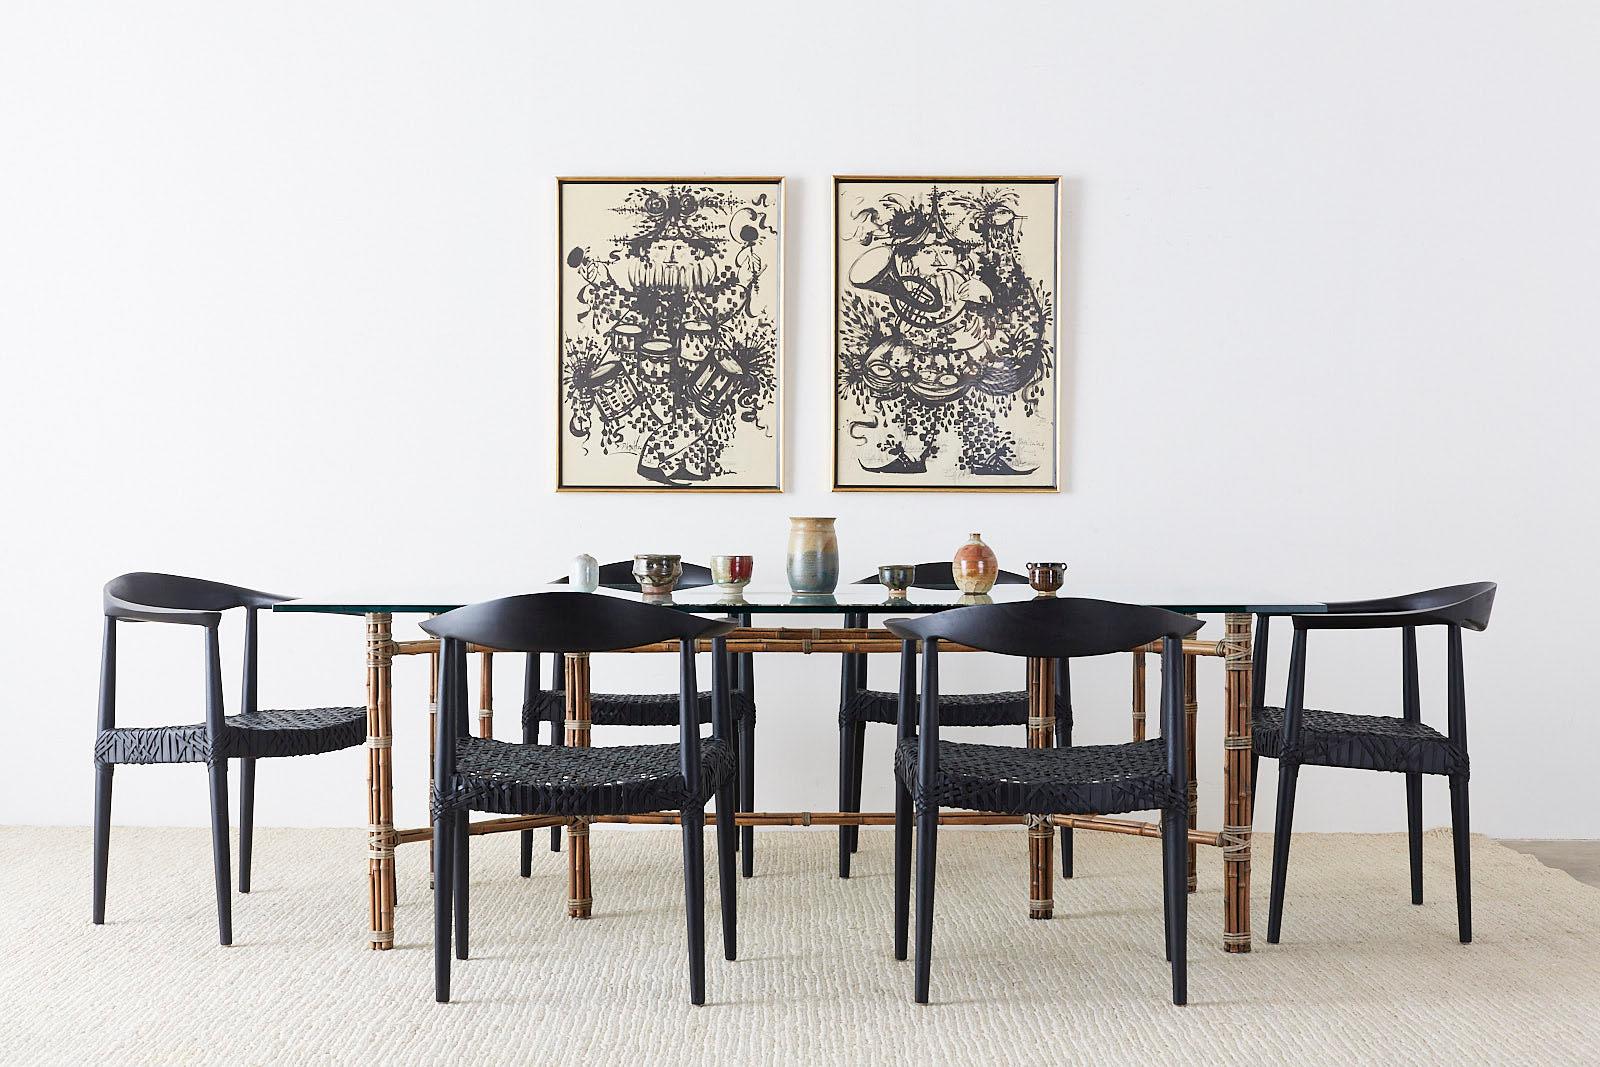 Dramatic set of 10 teak round chairs after Hans Wegner. Features an ebonized wood frame with leather strapping. Comfortable, reproduced after the chair made by Johannes Hansen designed by Hans Wegner in the Scandinavian modern style. Also known as